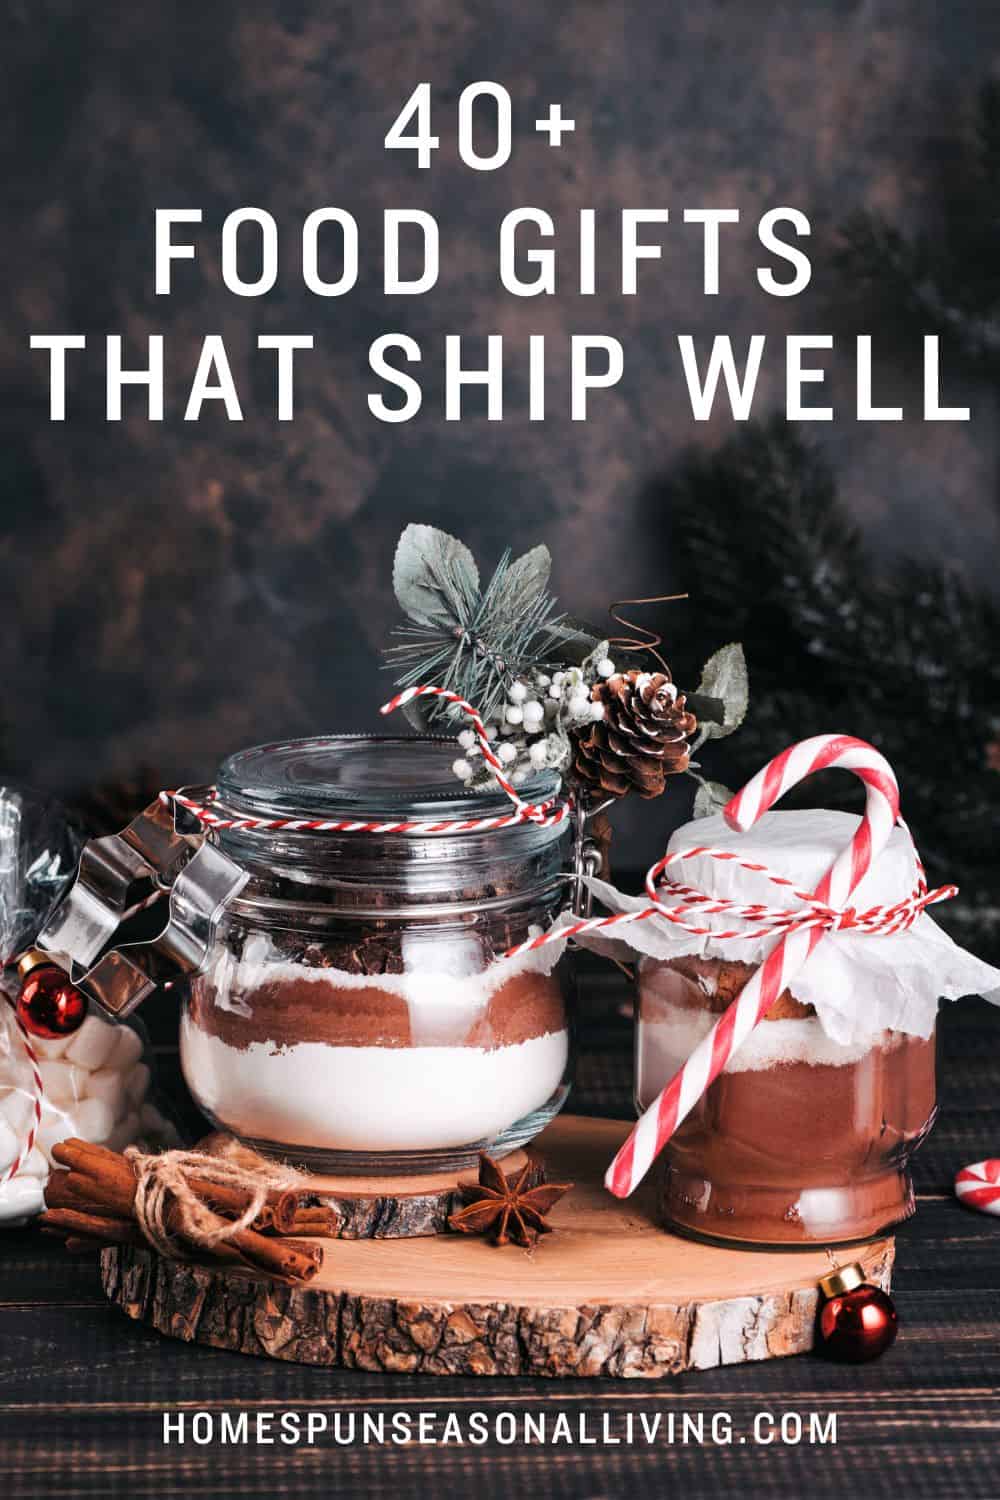 Shipping Baked Goods: Treats for Far Away Friends and Family